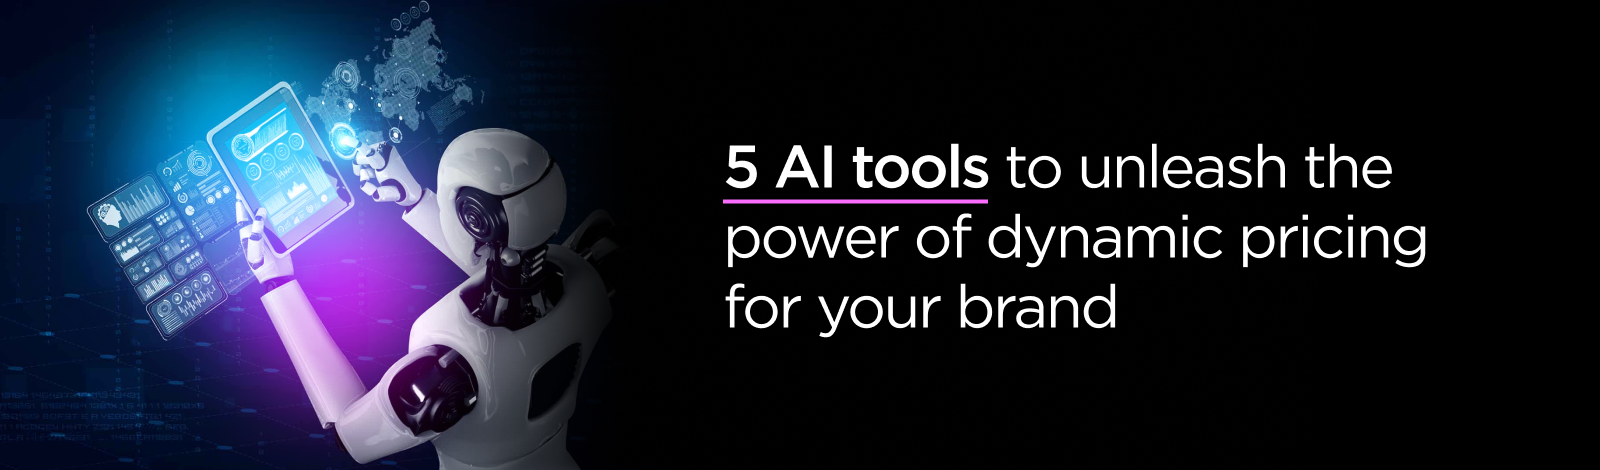 5 AI tools to unleash the power of dynamic pricing for your brand